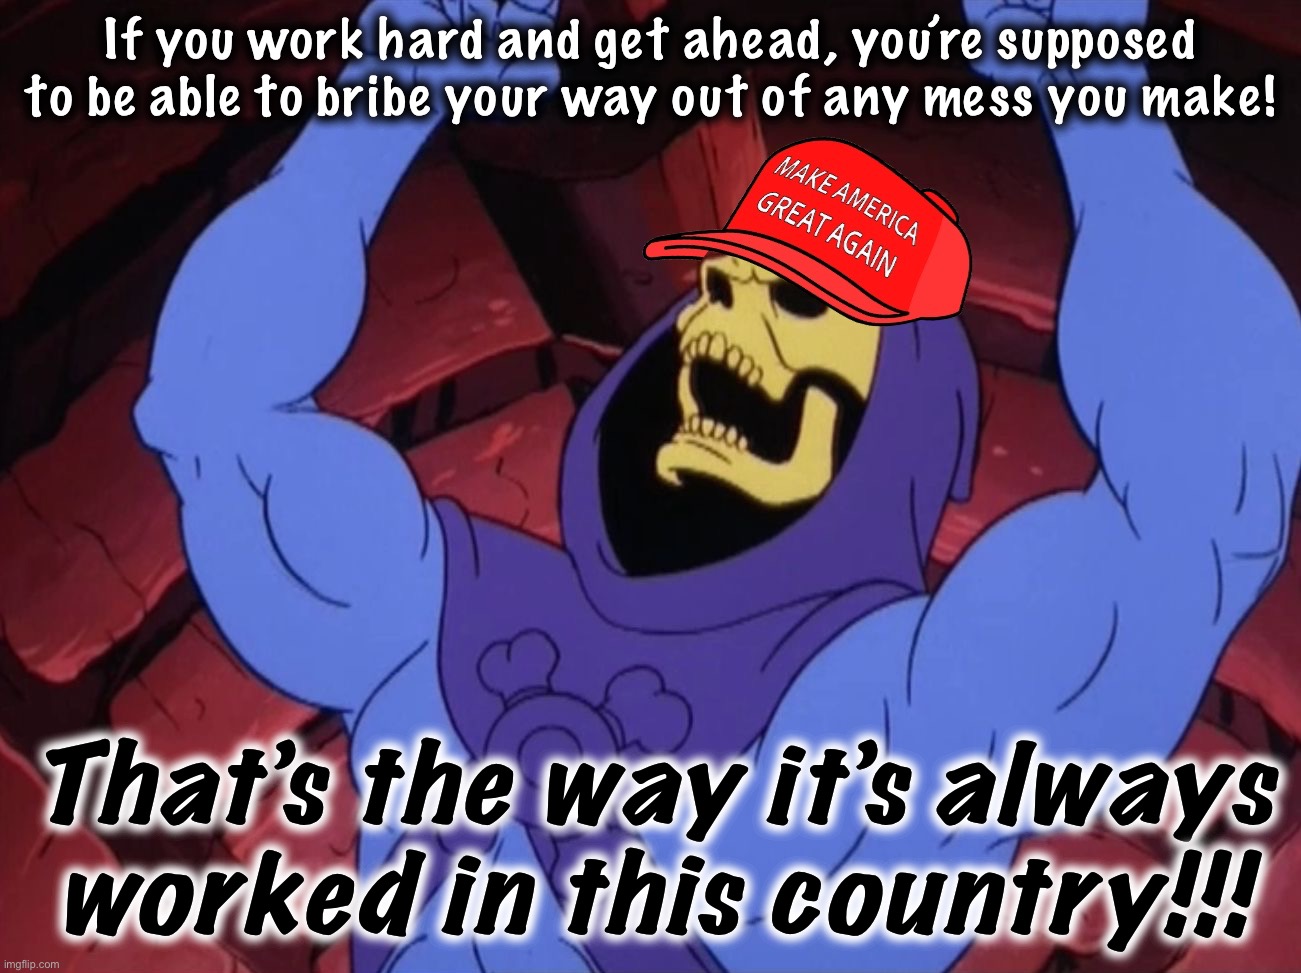 "If billionaires aren’t safe, then no one’s safe!!" | If you work hard and get ahead, you’re supposed to be able to bribe your way out of any mess you make! That’s the way it’s always worked in this country!!! | image tagged in maga skeletor,skeletor,maga,conservative logic,trump is an asshole,trump is a moron | made w/ Imgflip meme maker